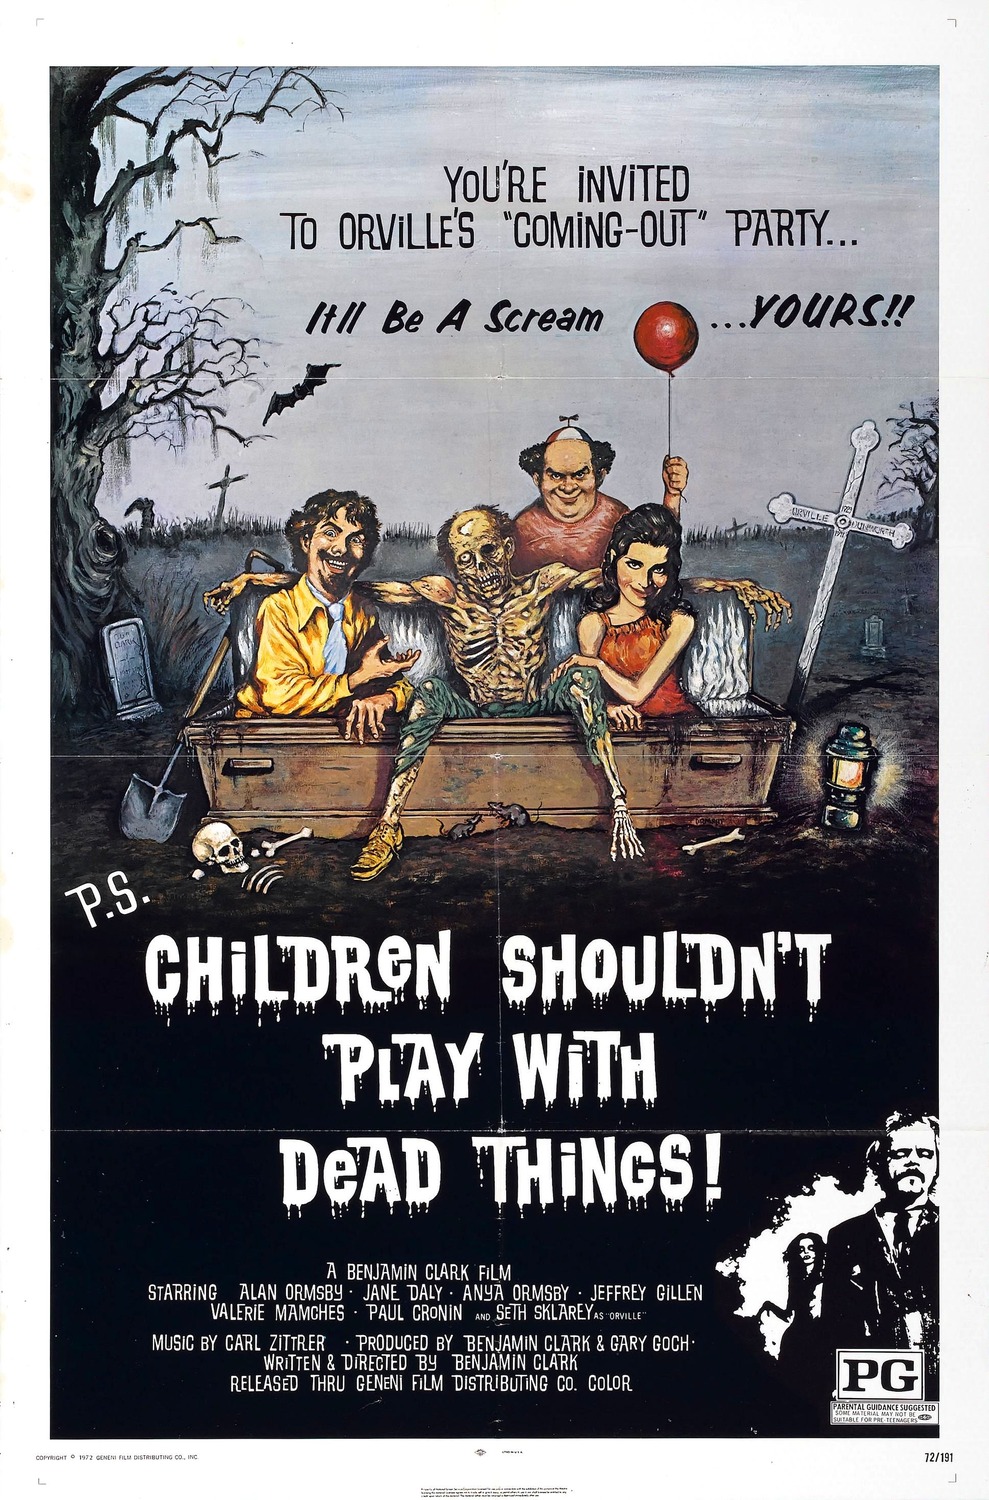 Play with Dead Things: Extra Large Movie Poster Image - Internet Movie